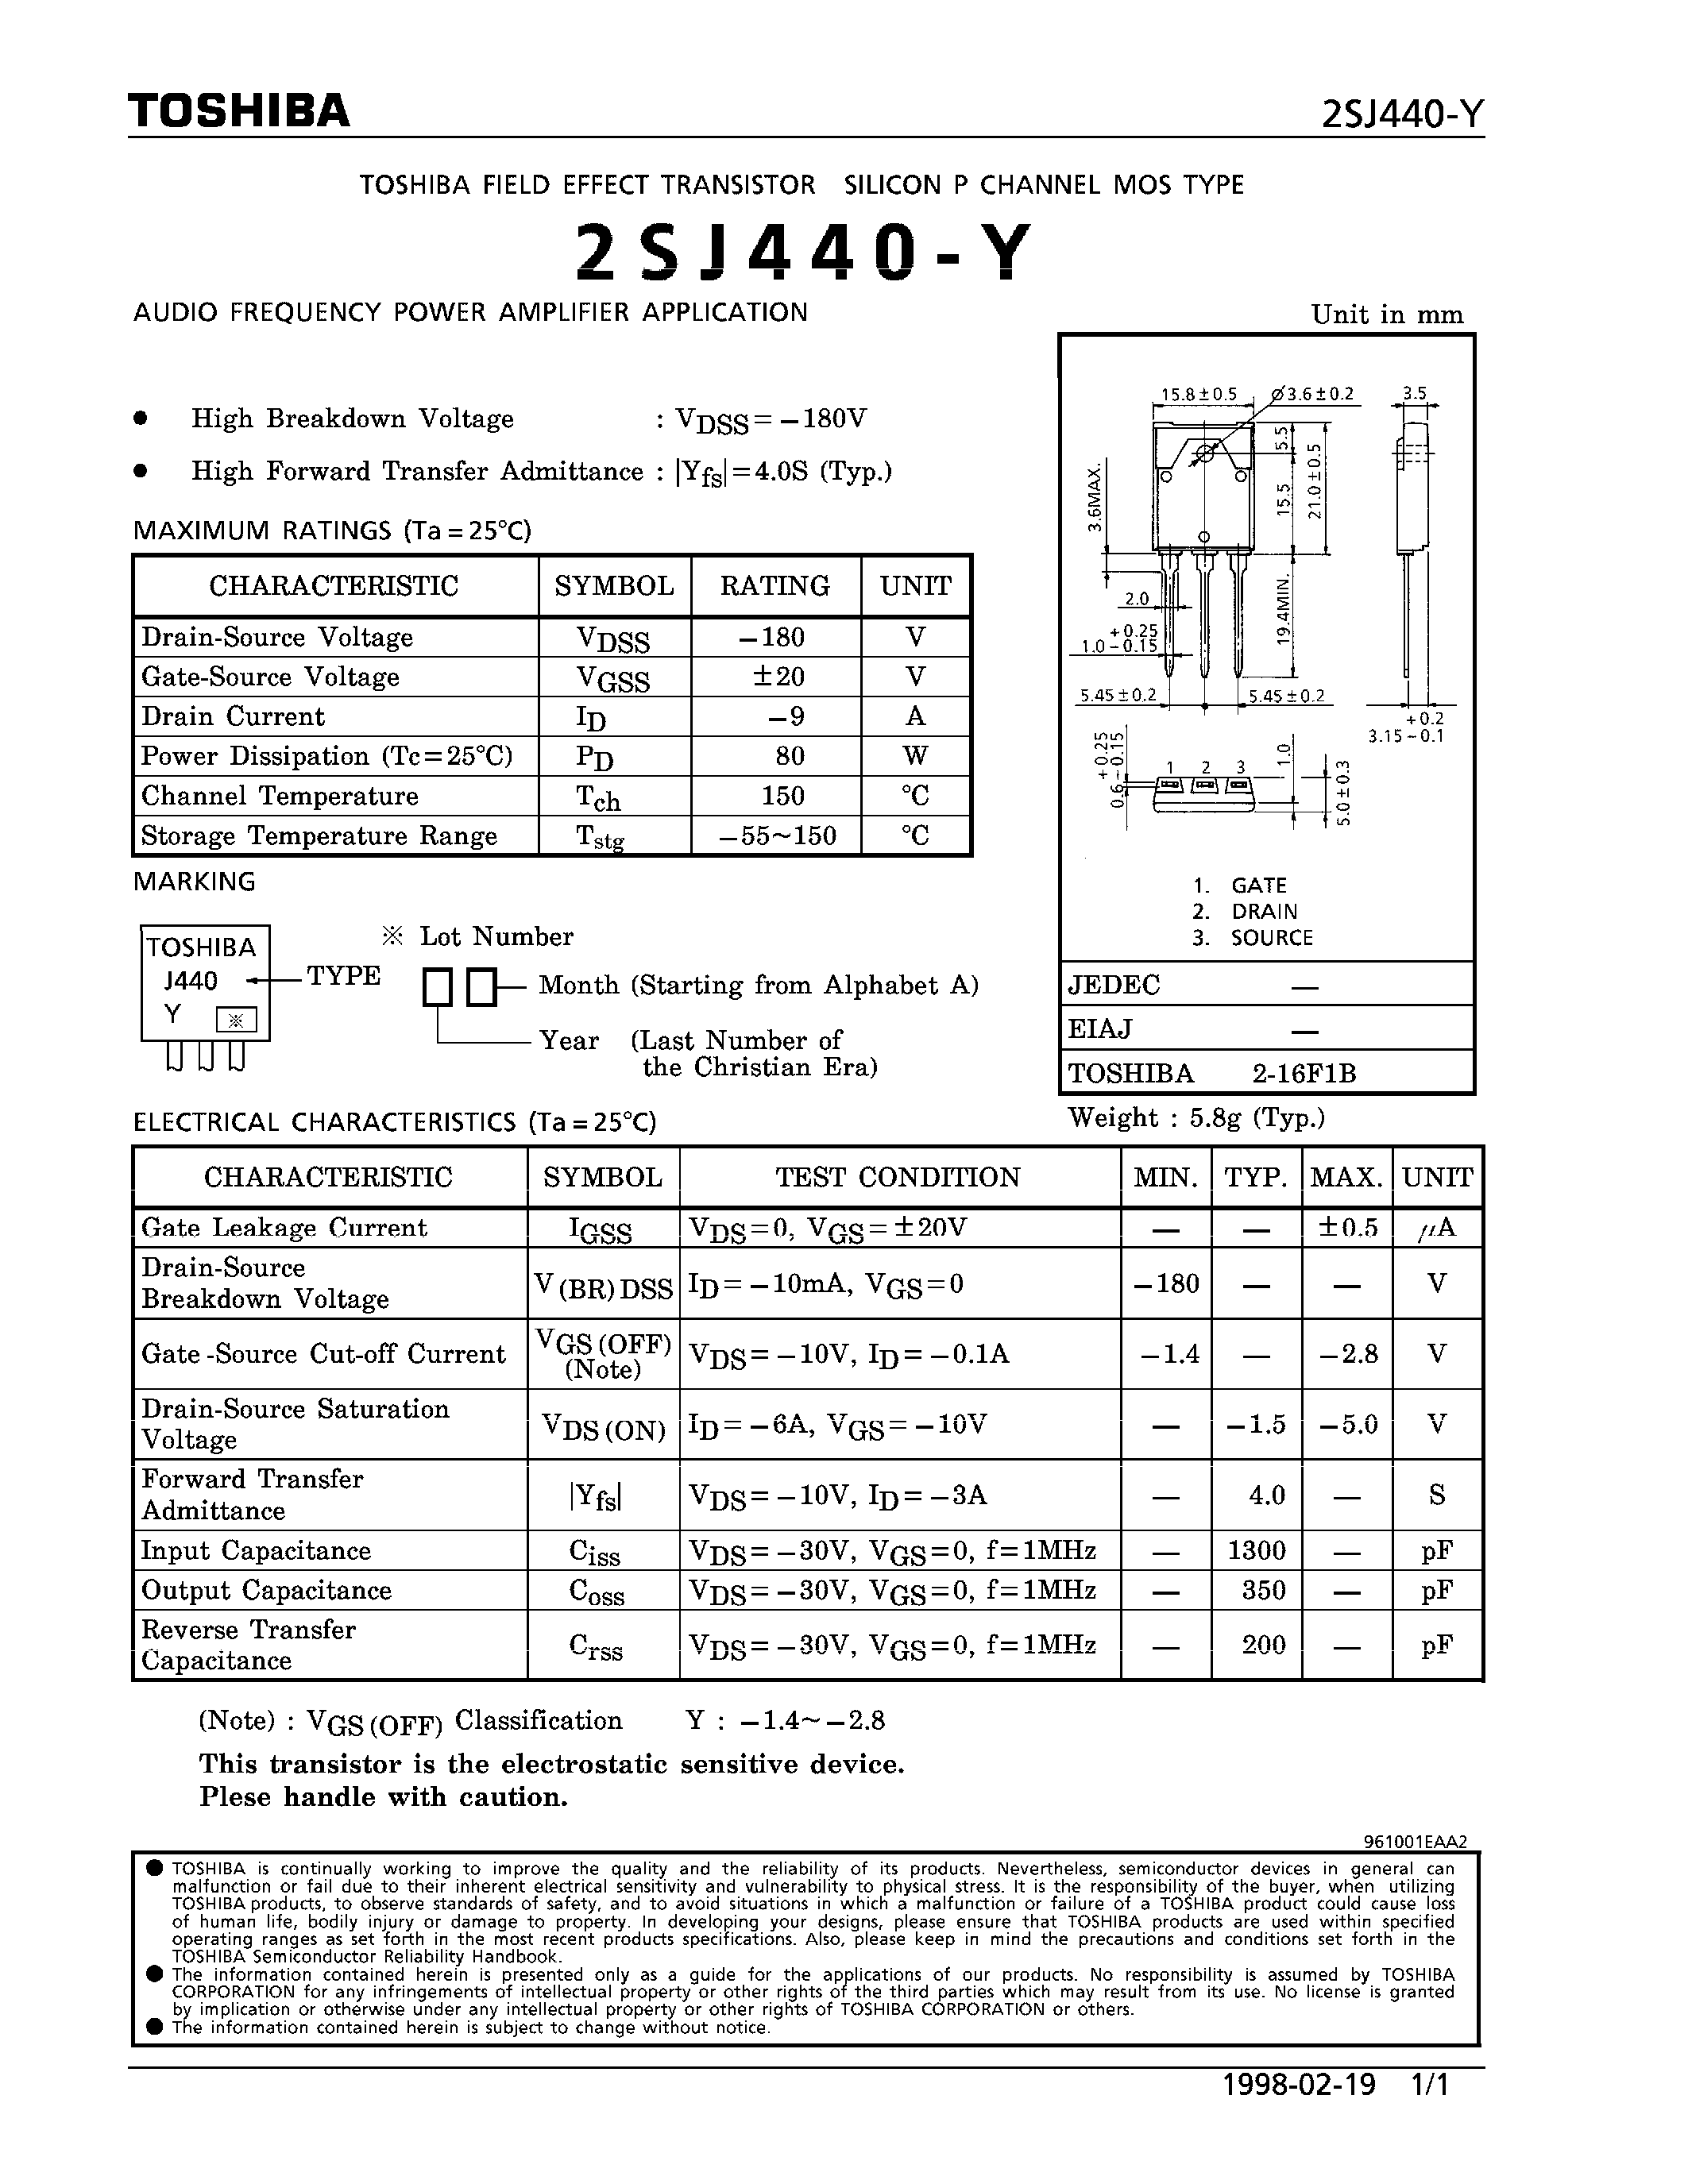 Datasheet 2SJ440-Y - P CHANNEL MOS TYPE (AUDIO FREQUENCY POWER AMPLIFIER APPLICATION) page 1